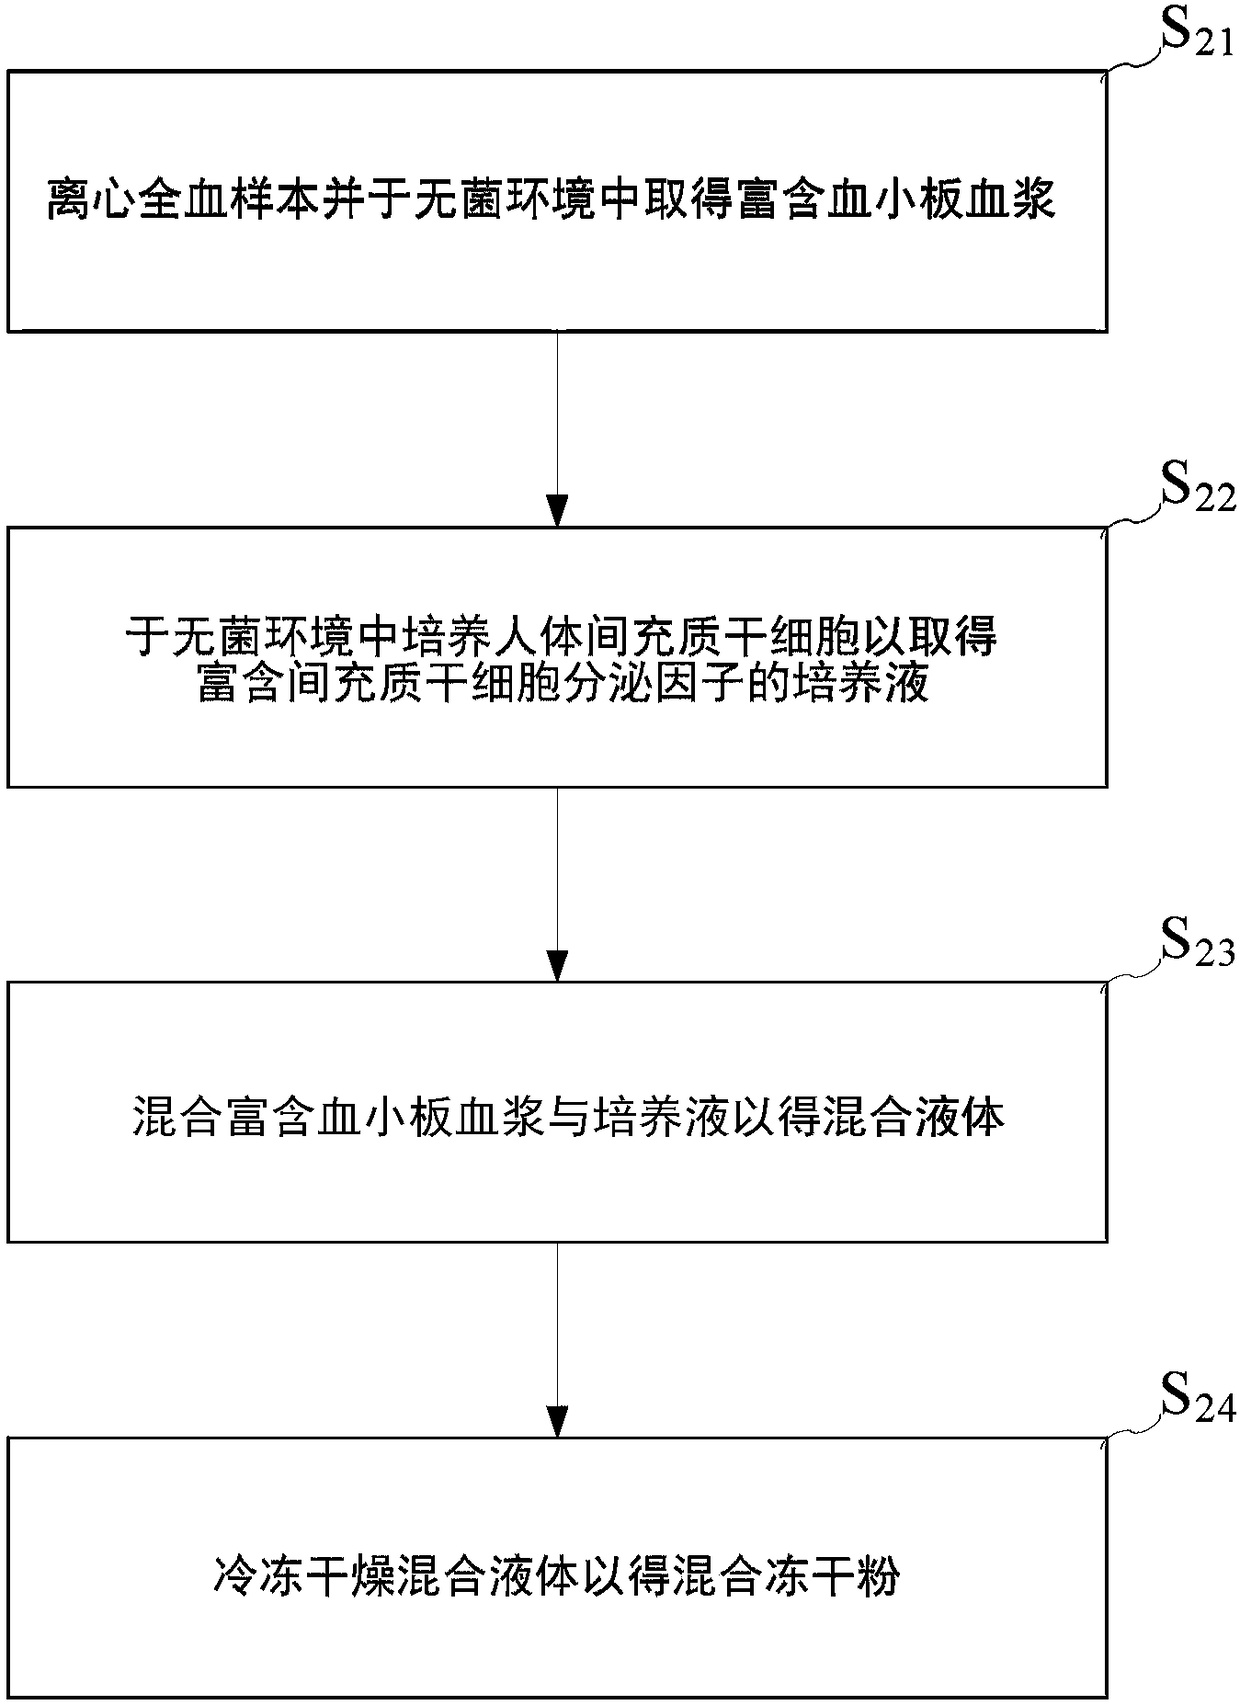 Mixed freeze-dried powder of platelet-rich plasma combined with excreted factor of human mesenchymal stem cells and preparation method thereof